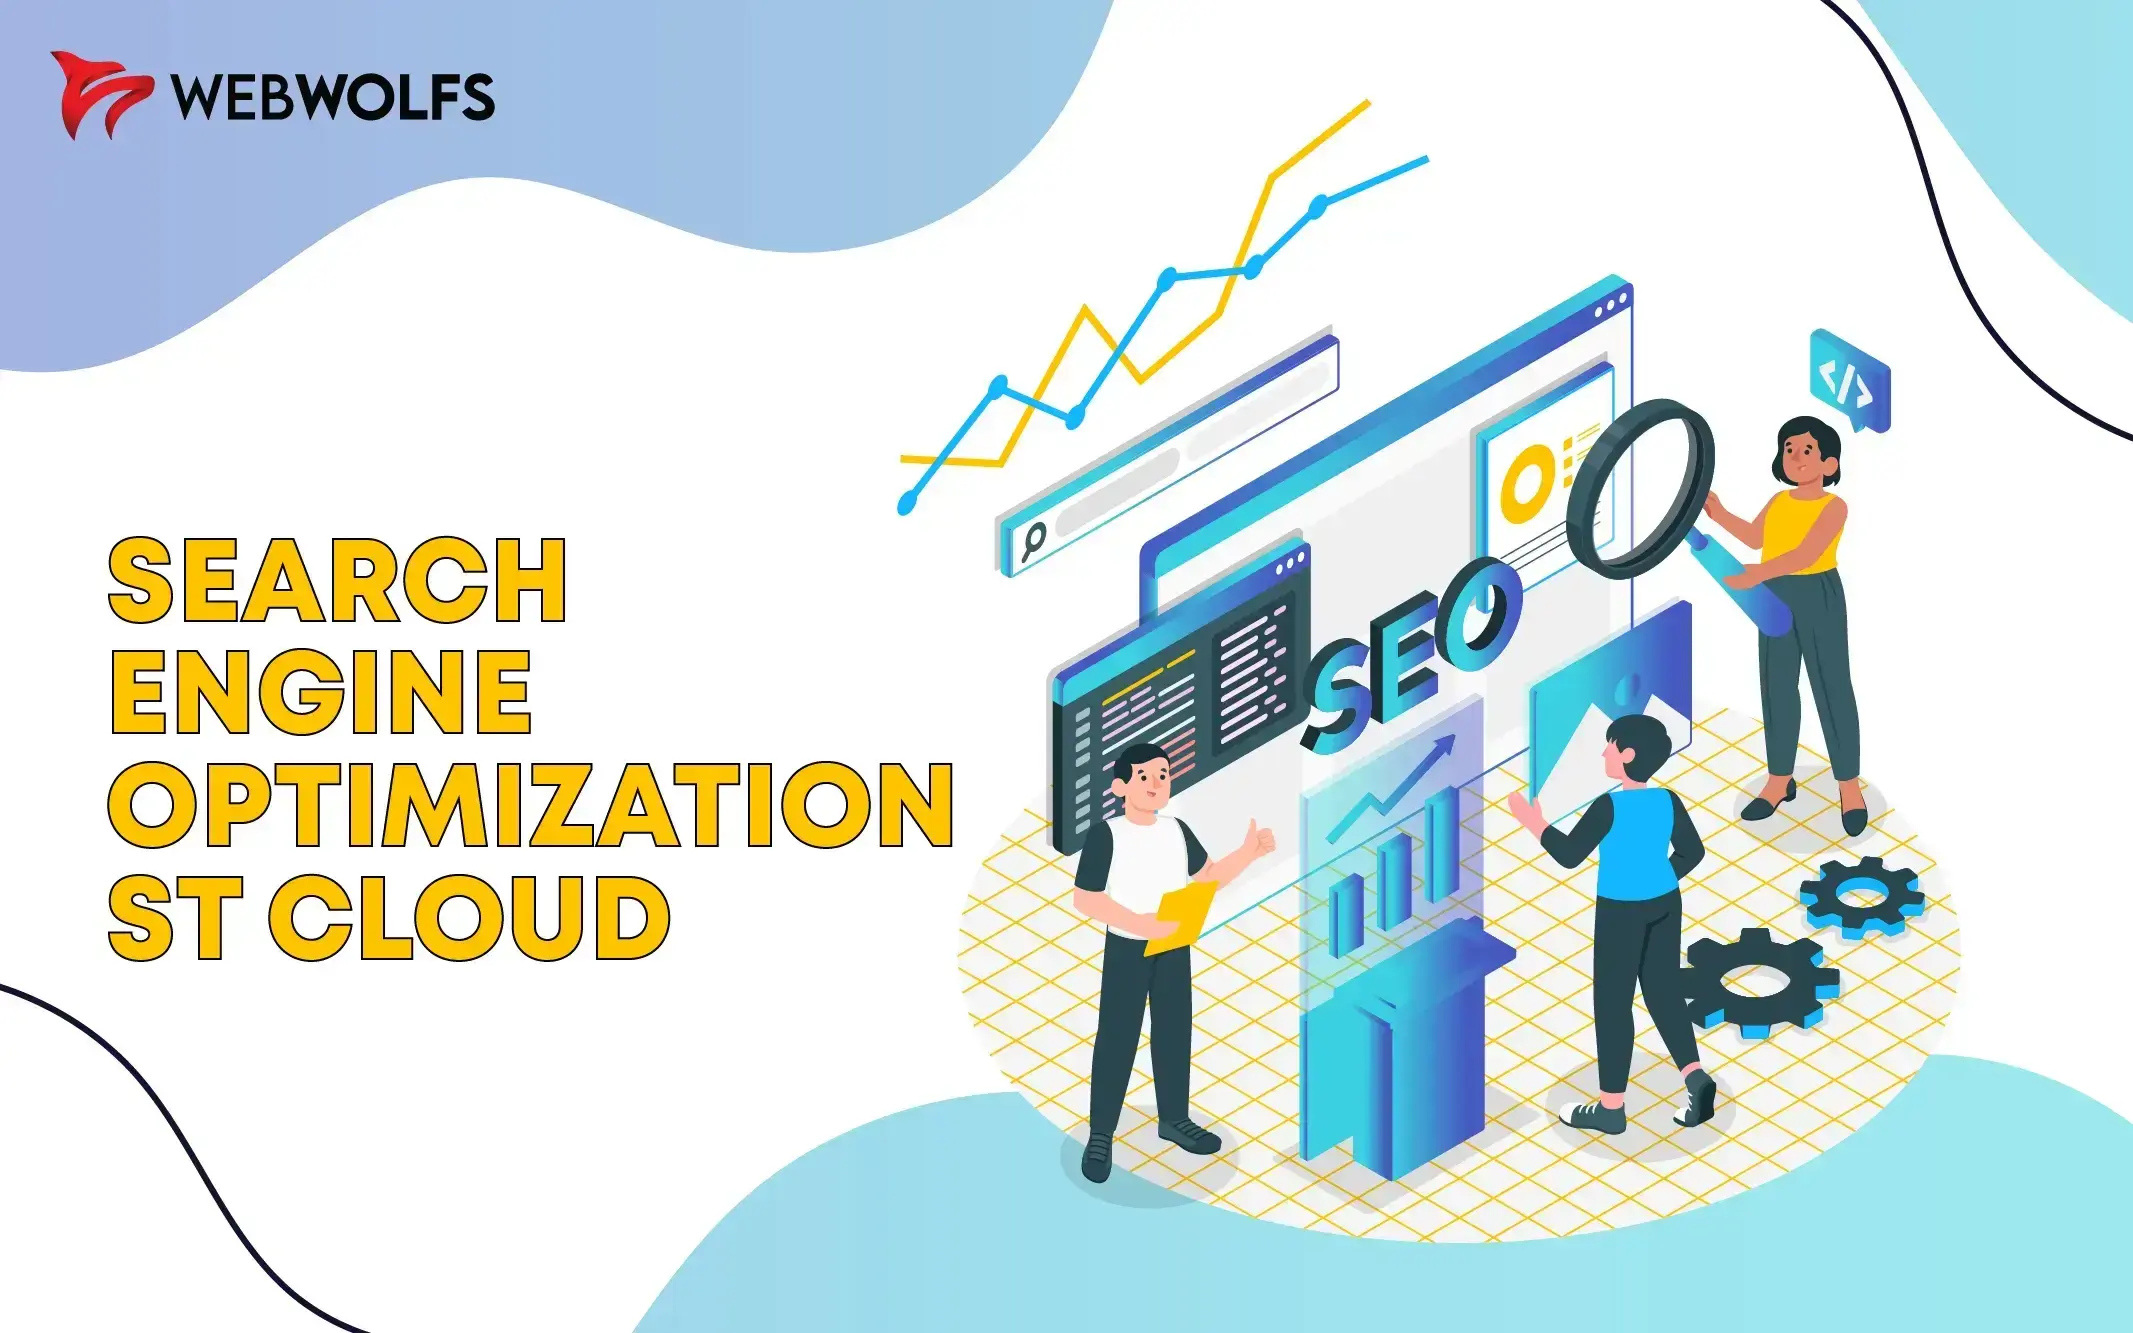 Demystifying Search Engine Algorithms: How Search Engine Optimization ST Cloud Works?